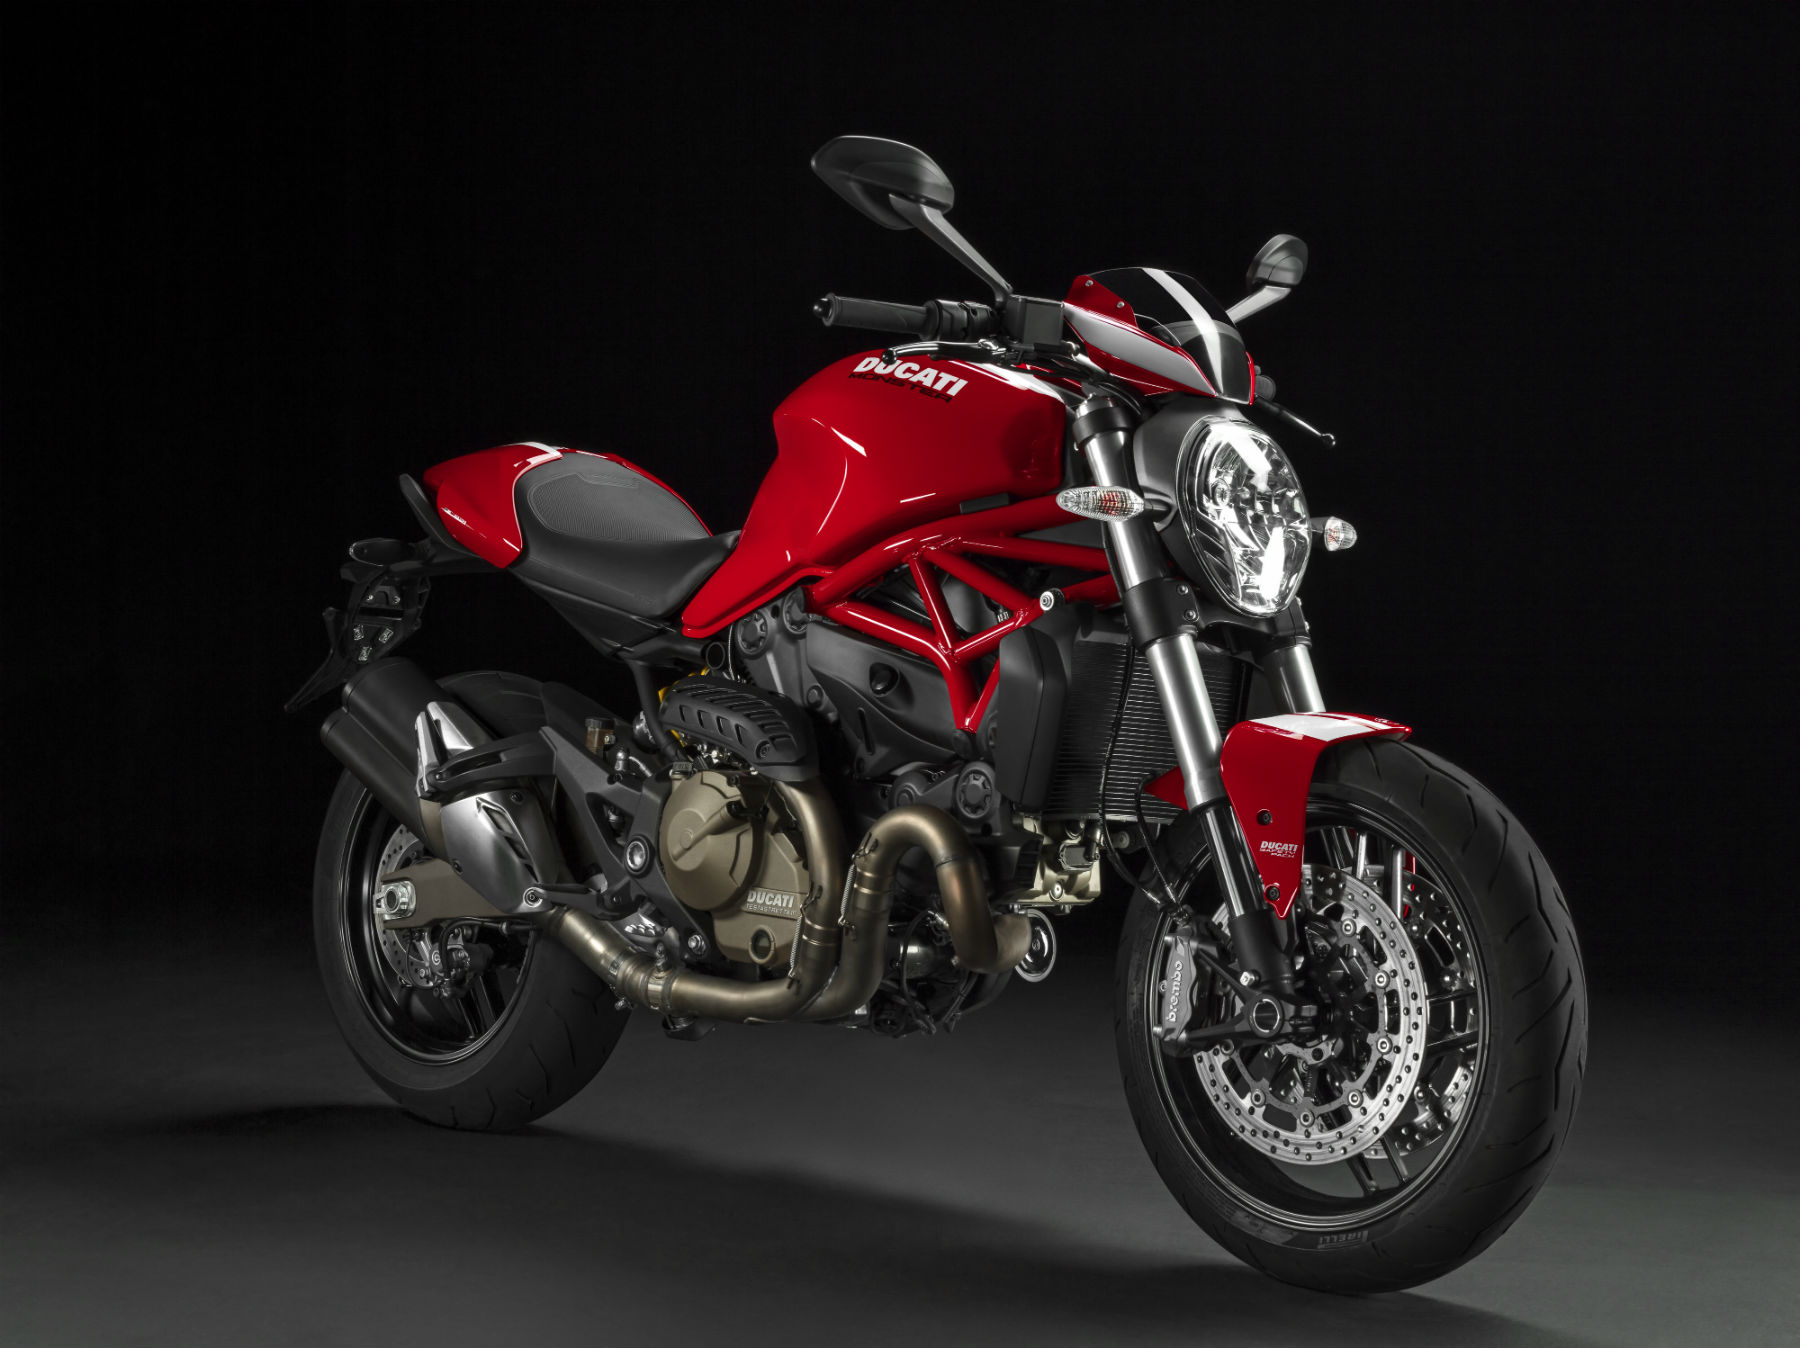 New paint schemes for Ducati Monster 821 and 1200 S